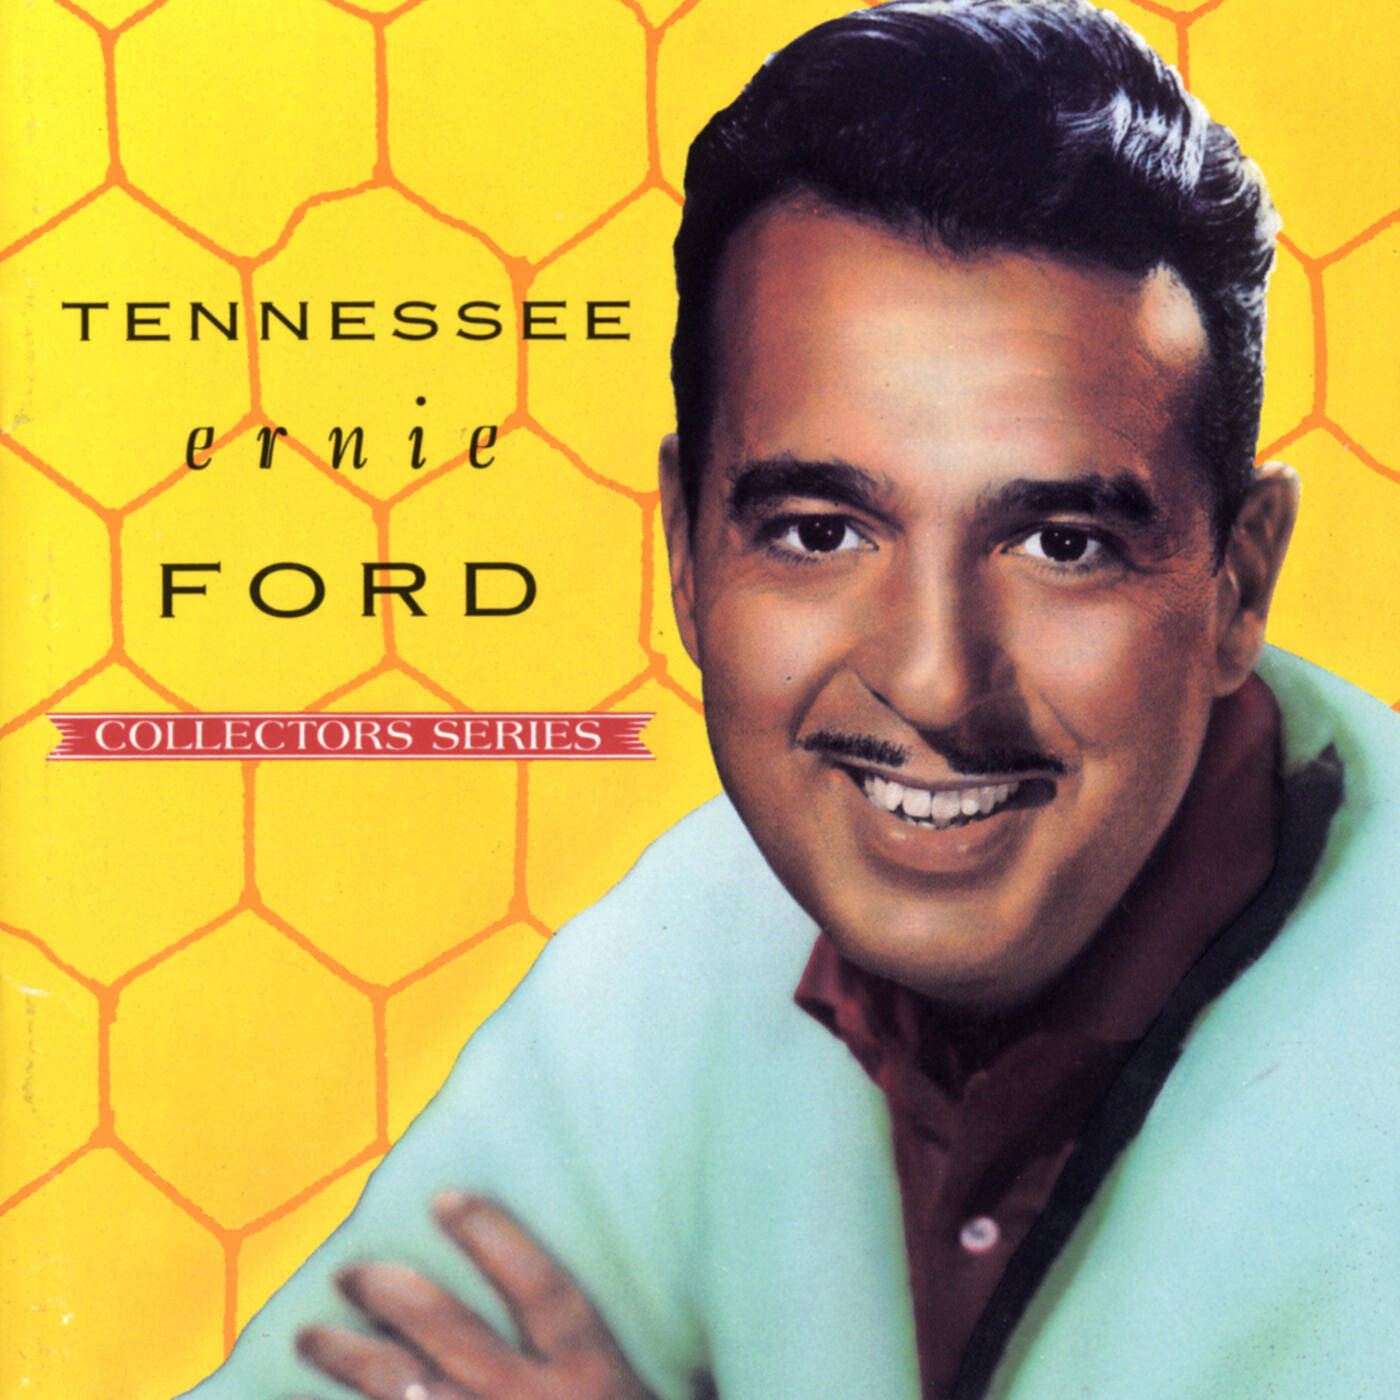 Tennessee Ernie Ford For Collectors Series Album Wallpaper